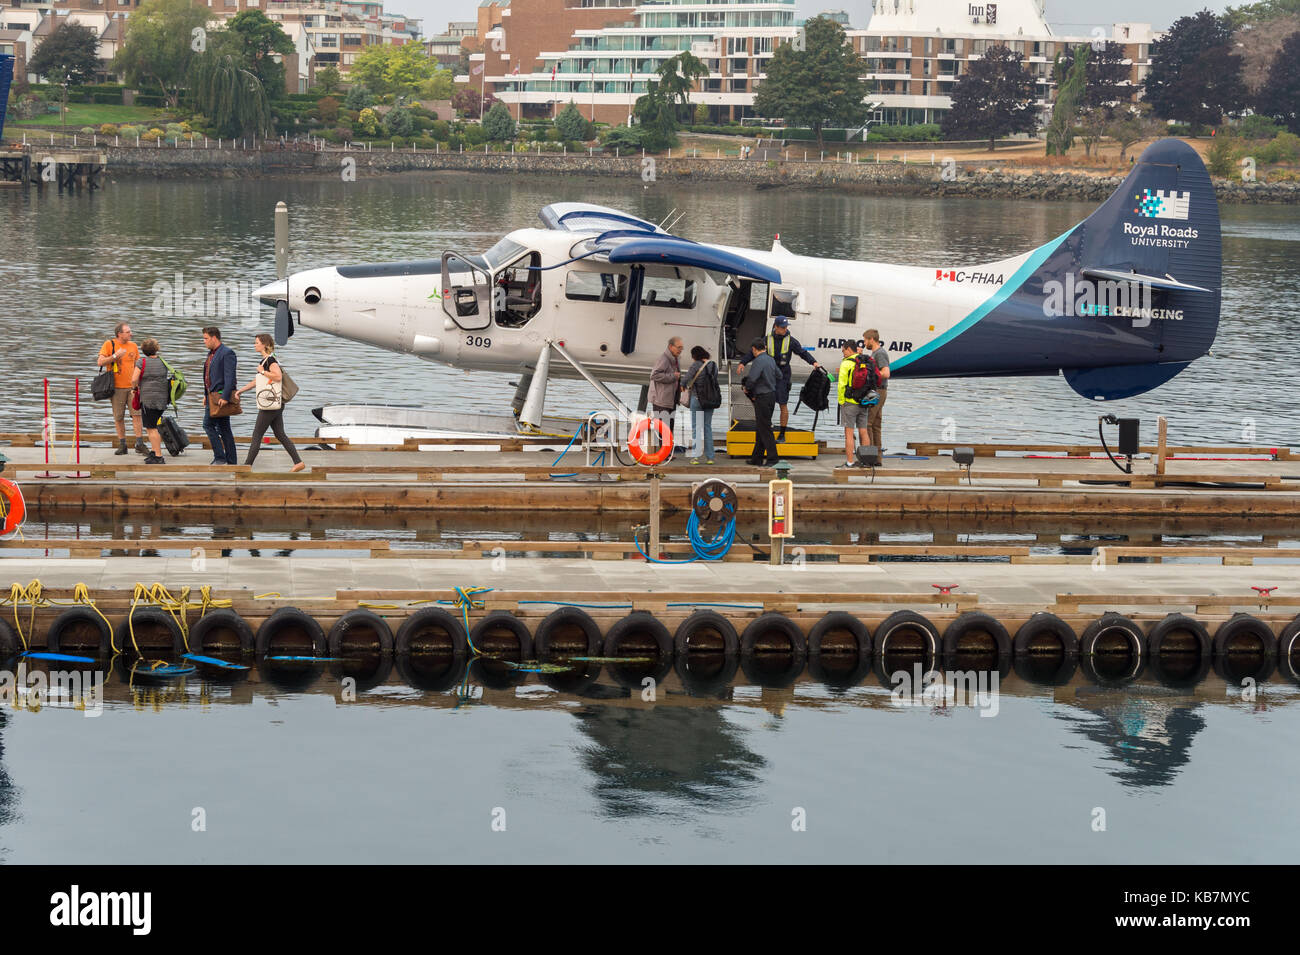 Vancouver, British Columbia, Canada - 7 September 2017: passengers disembarking a 'Harbour Air' Seaplane docked at Victoria Harbour Airport Stock Photo